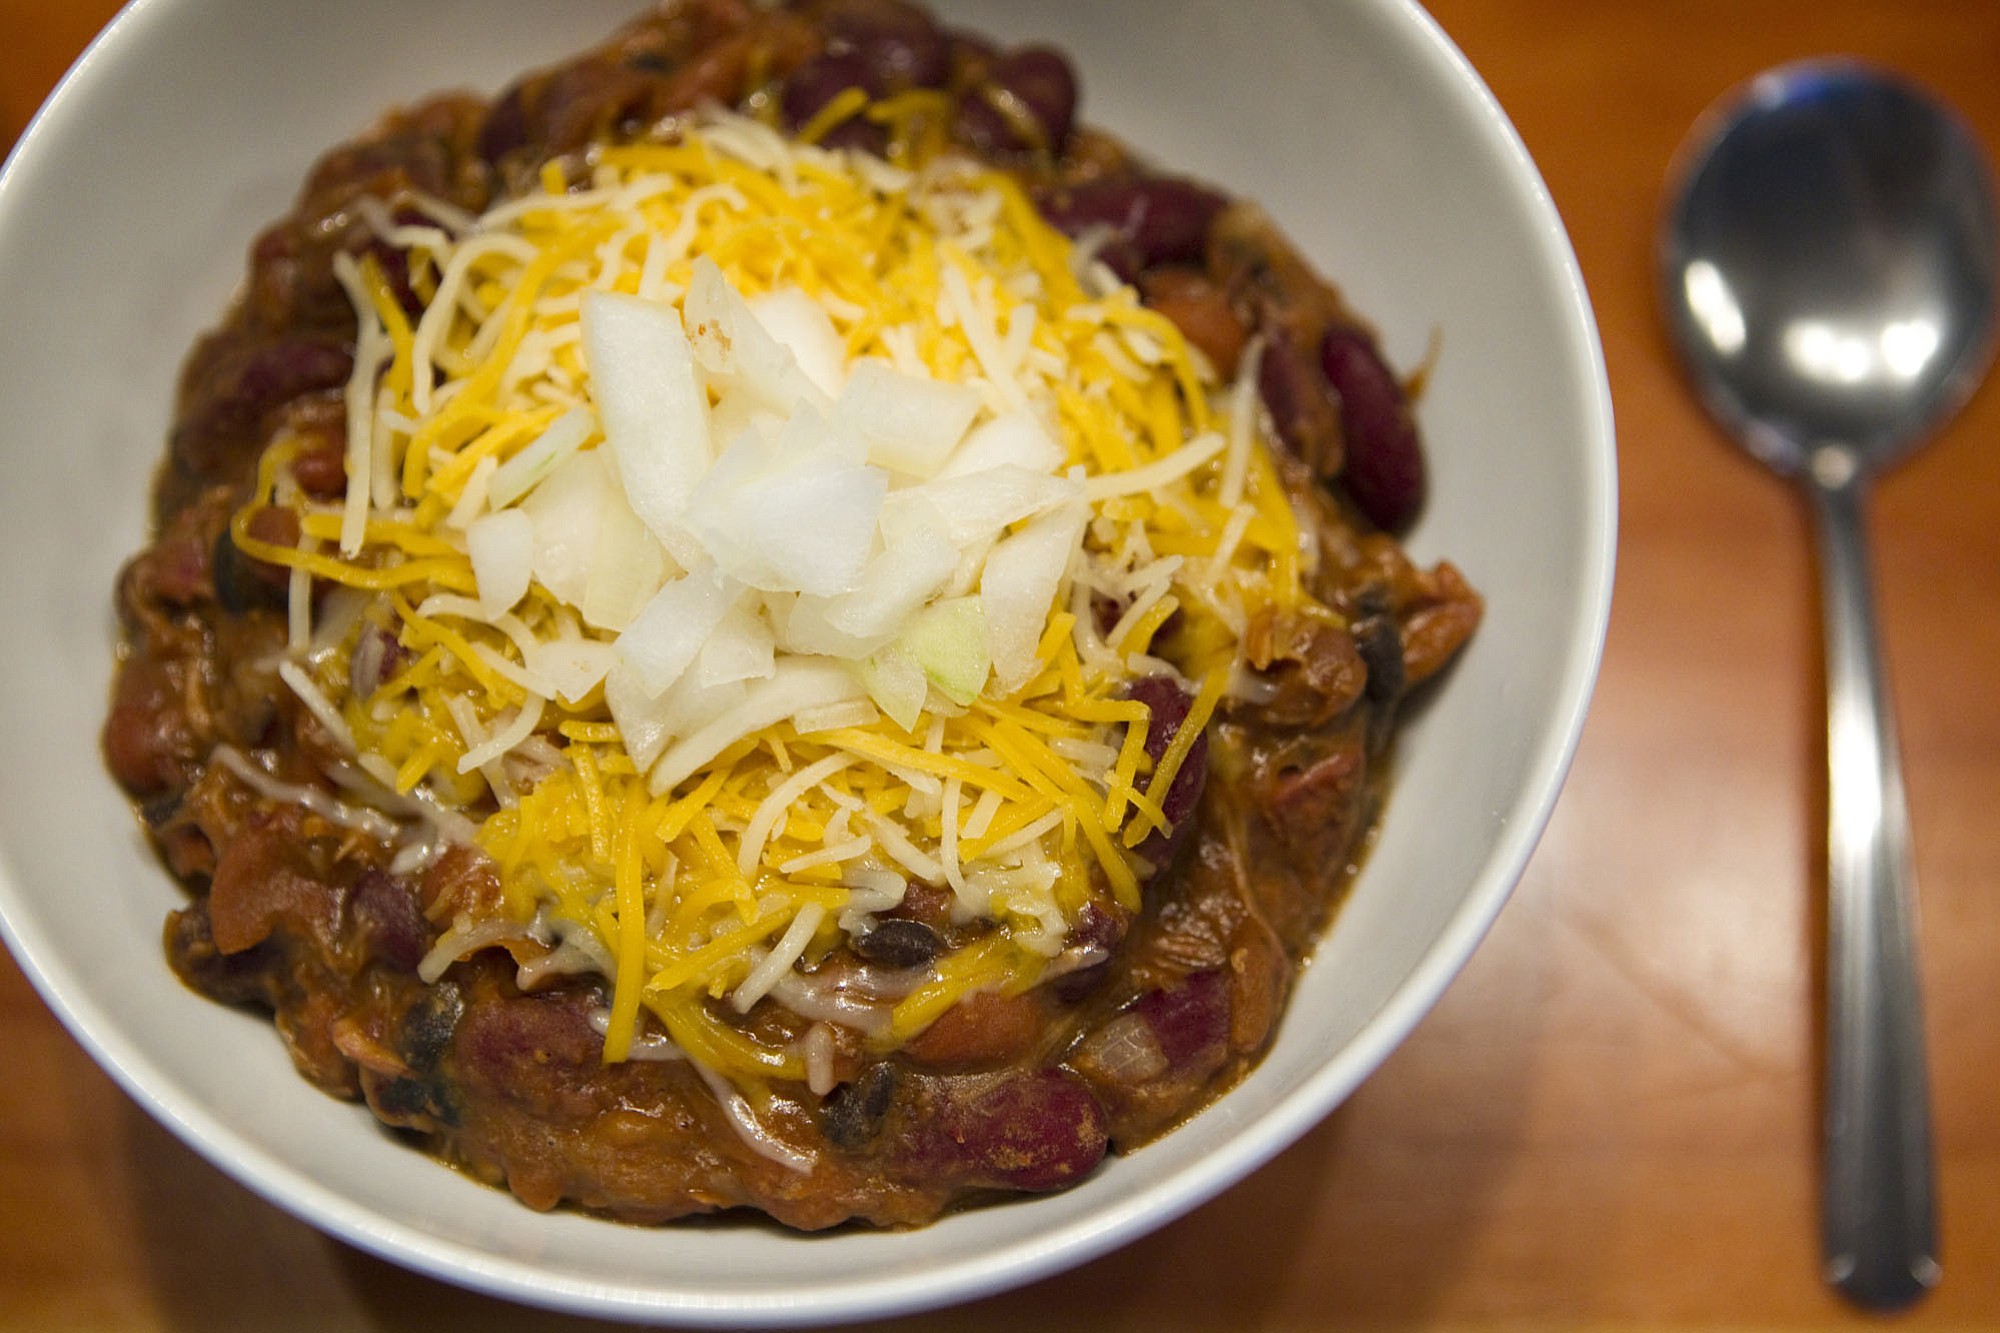 A bowl of red chili with beans, beef, cheese and onions is served at The Hoosegow, a new restaurant just south of the courthouse.